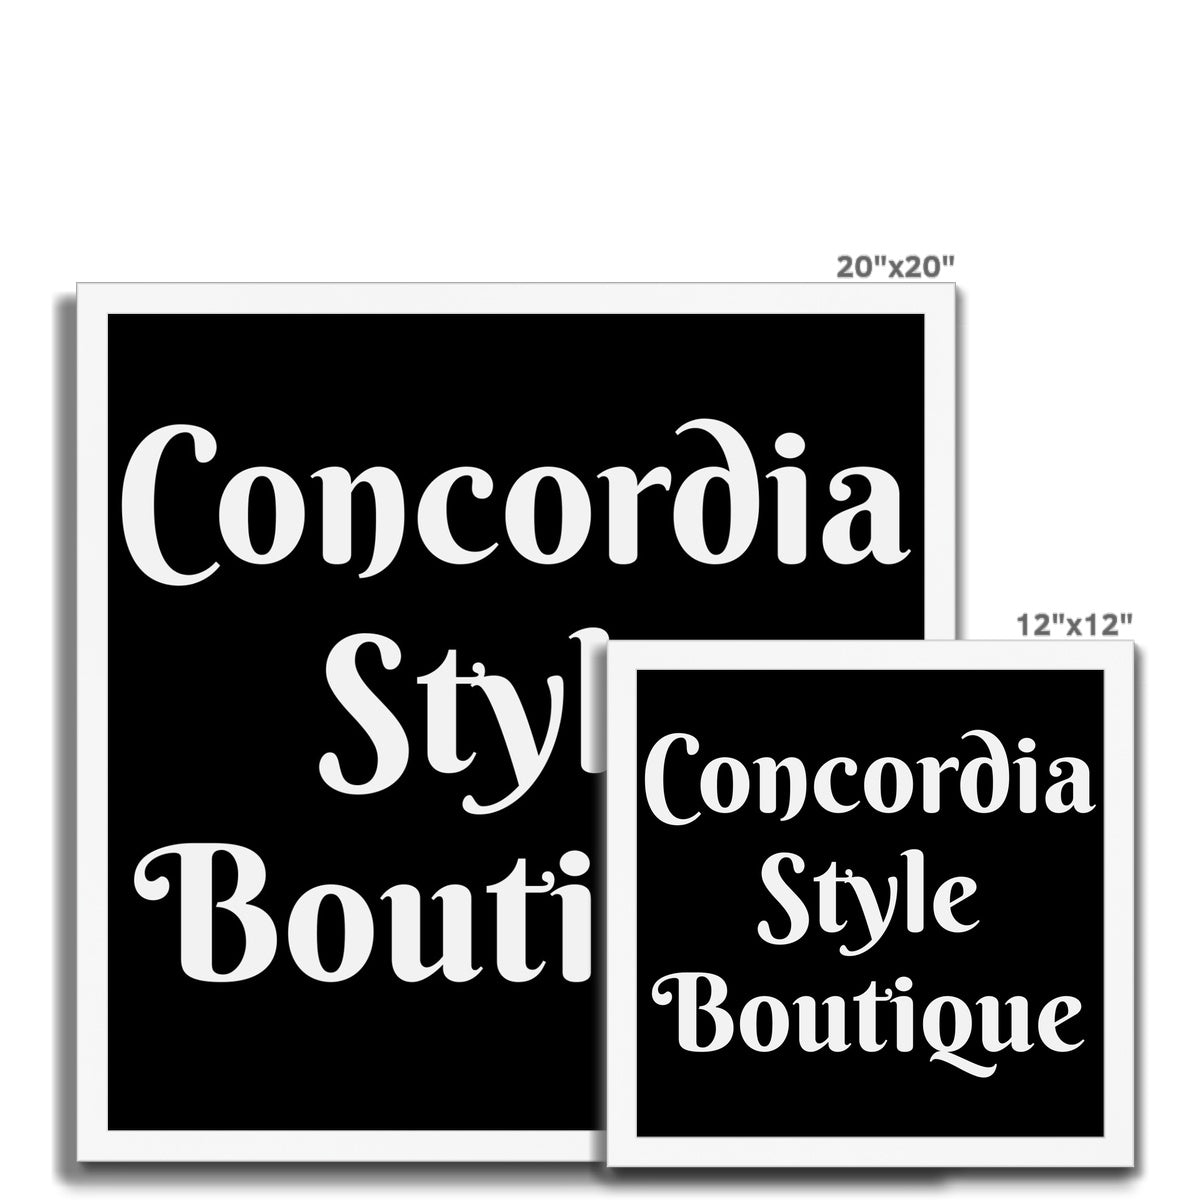 Concordia Style Boutique Budget Framed Poster